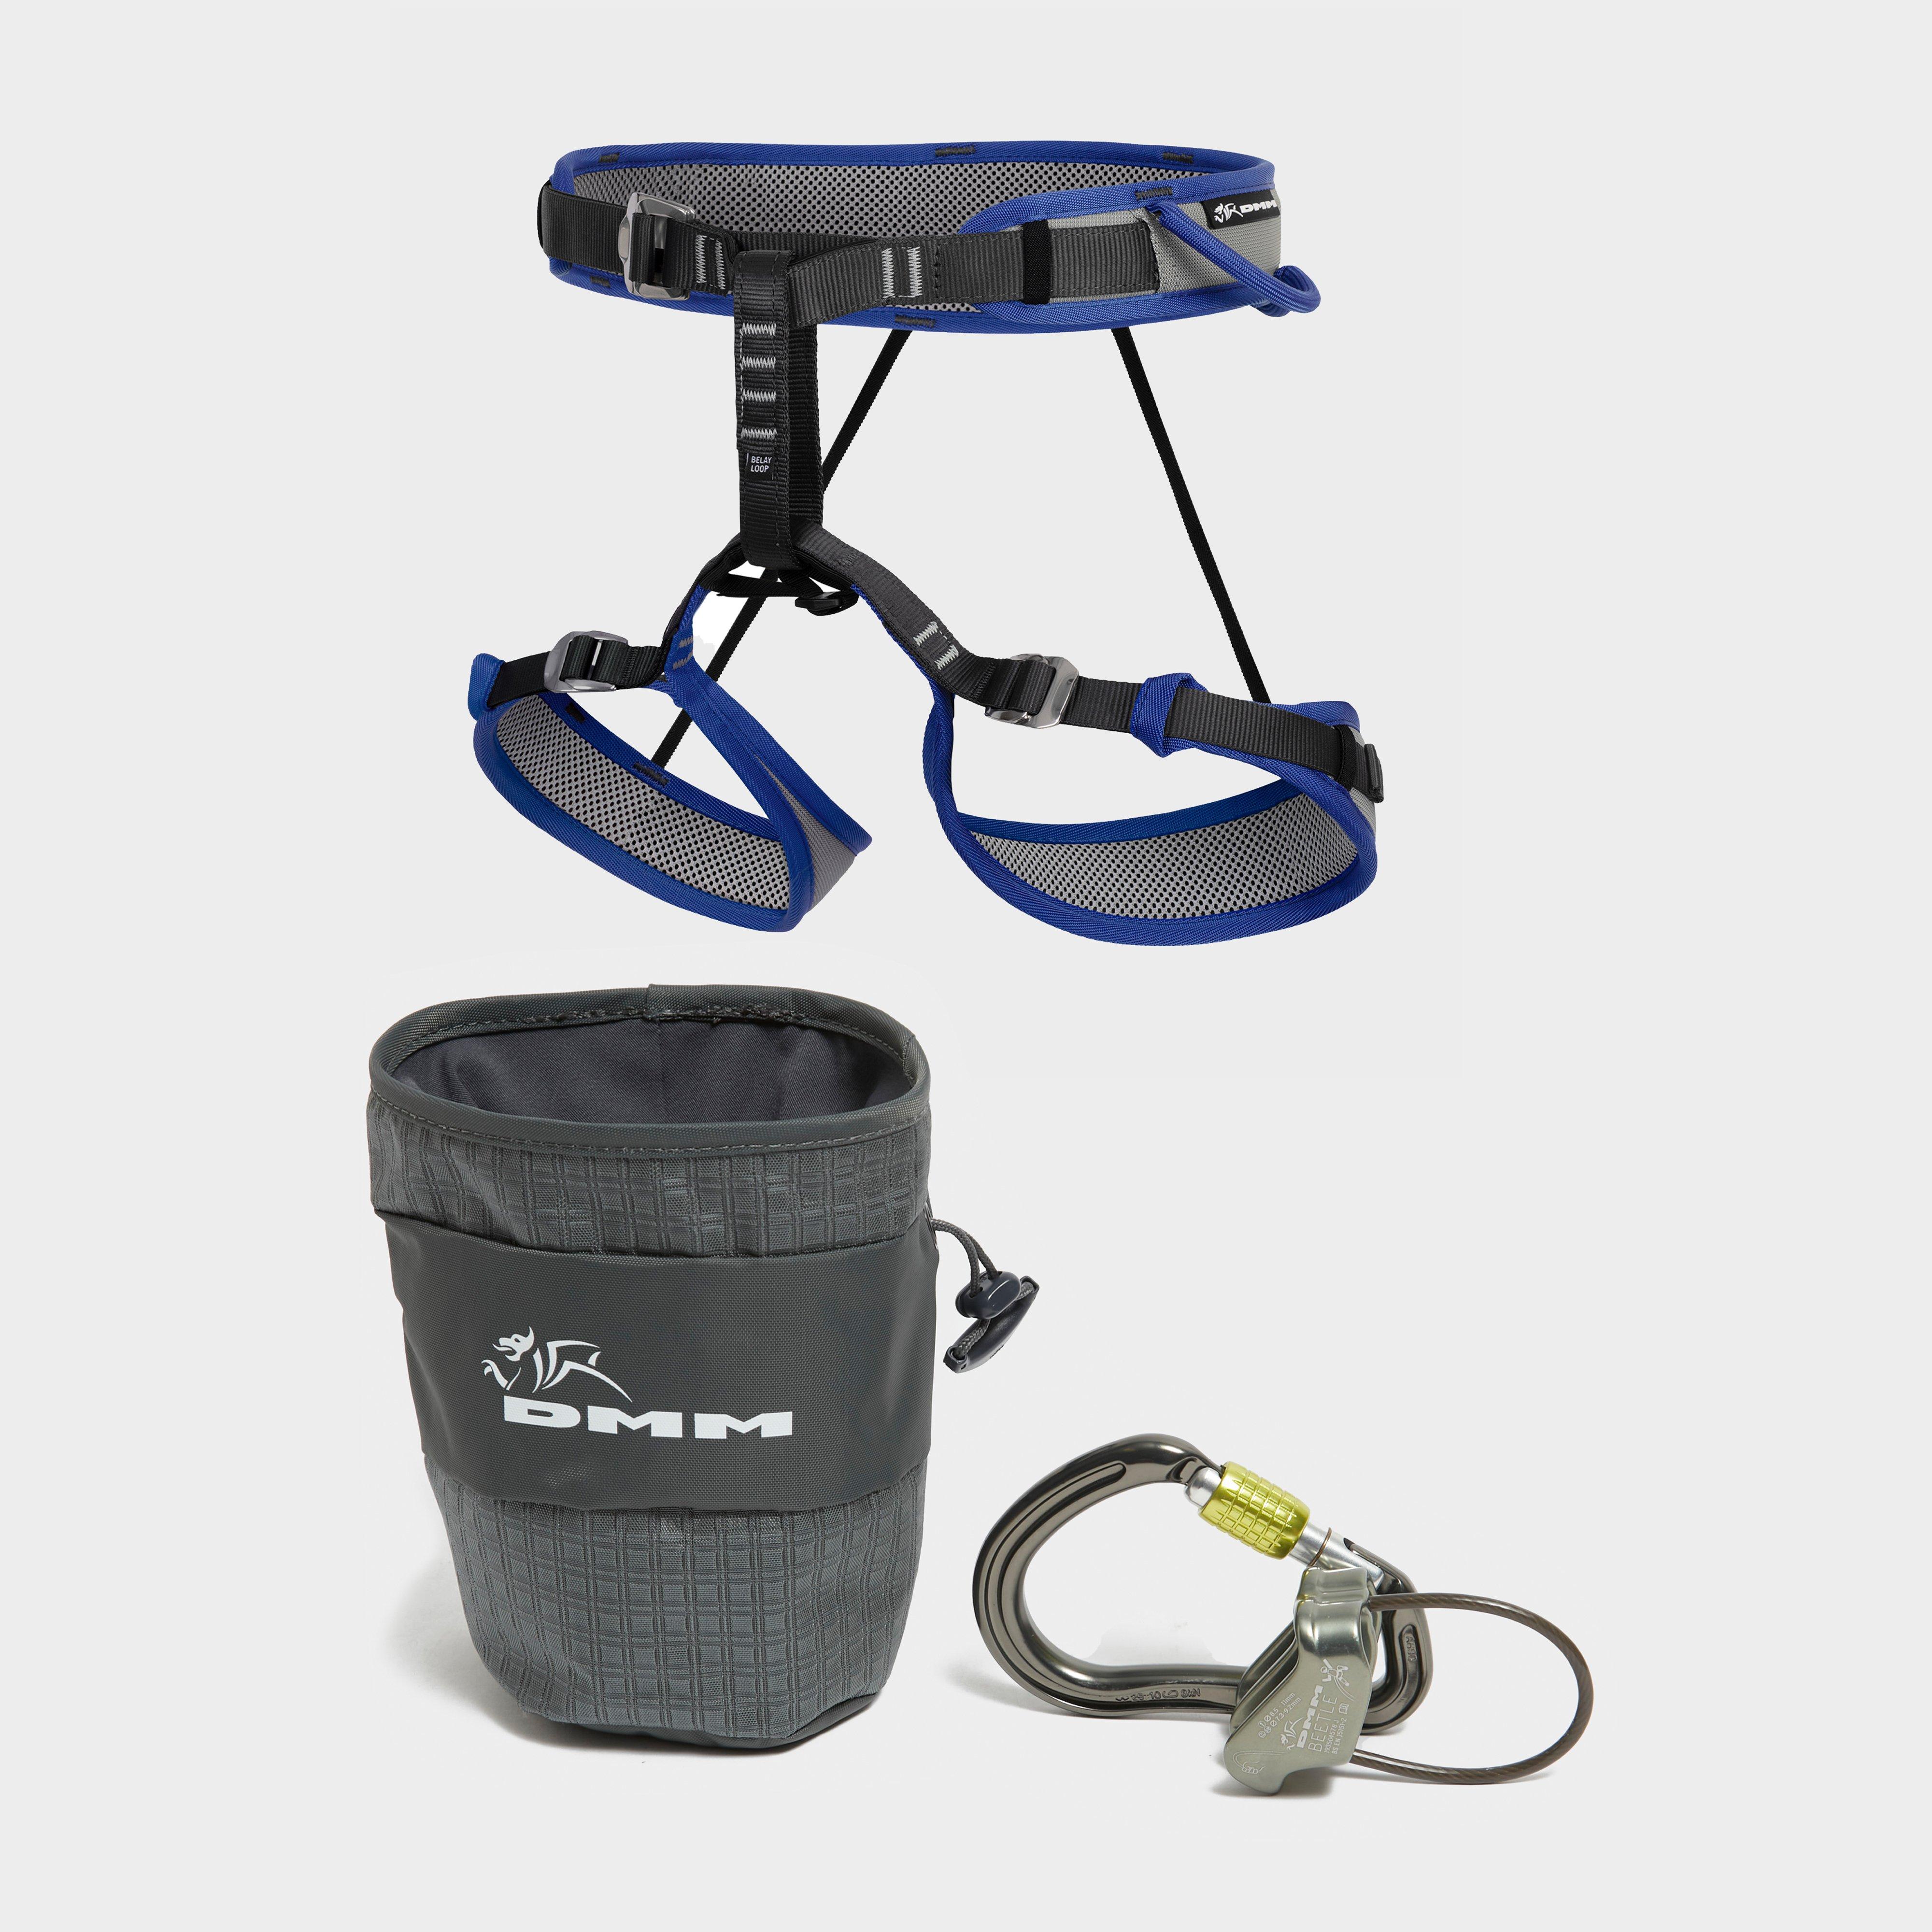 DMM Mithril Climbing Harness Review